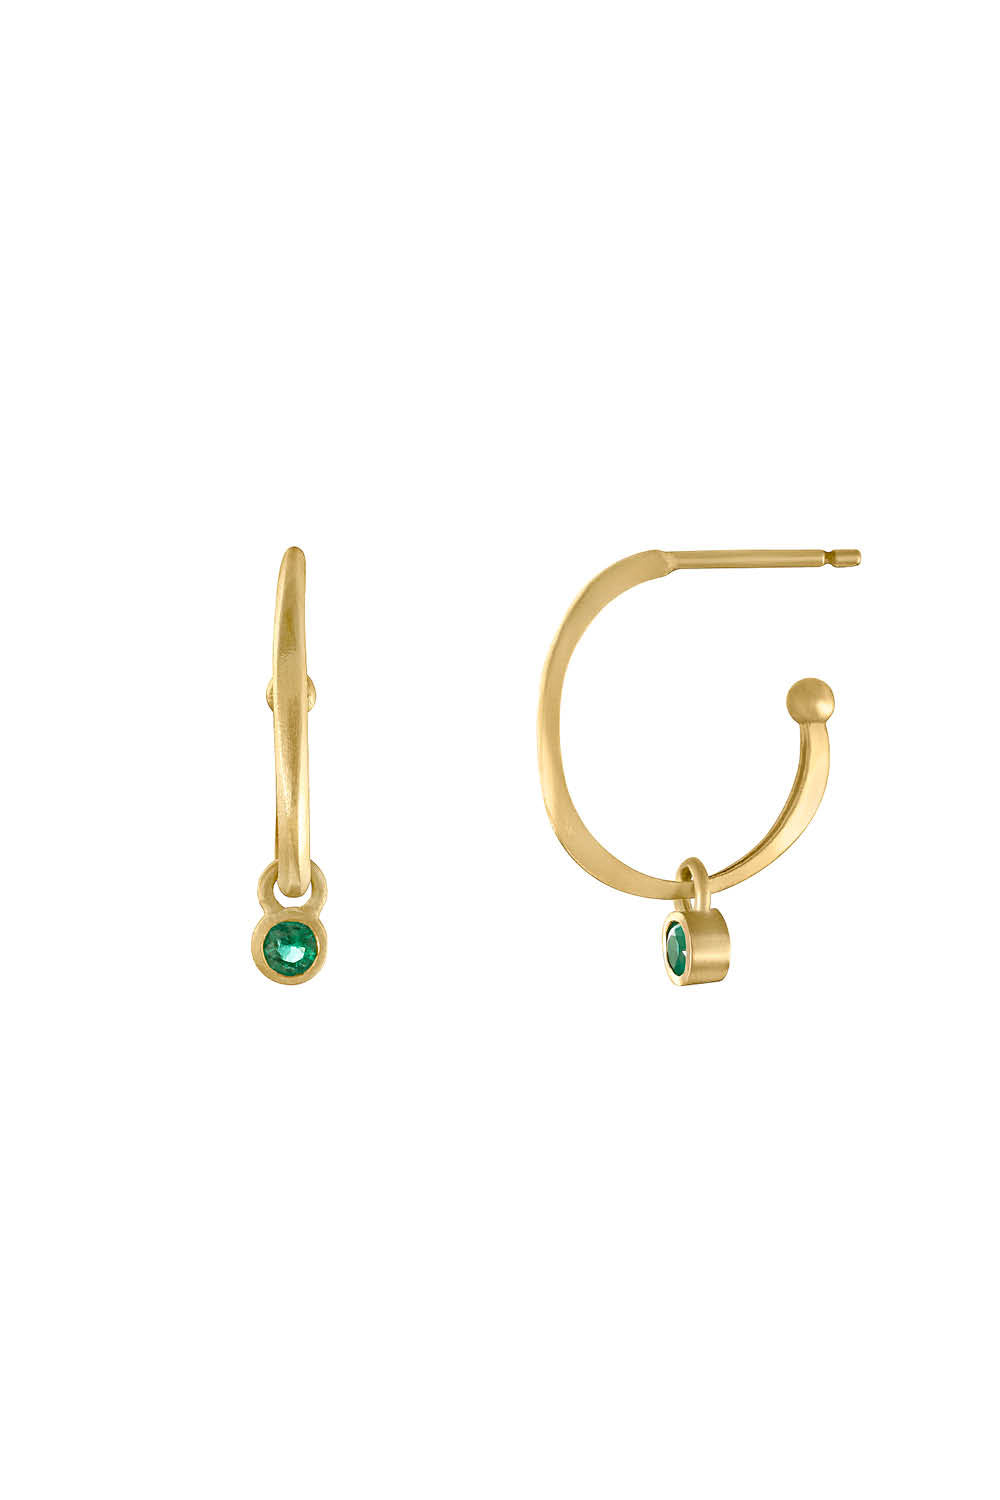 Sandy Leong Petite Halo Hoops with Emerald Charm